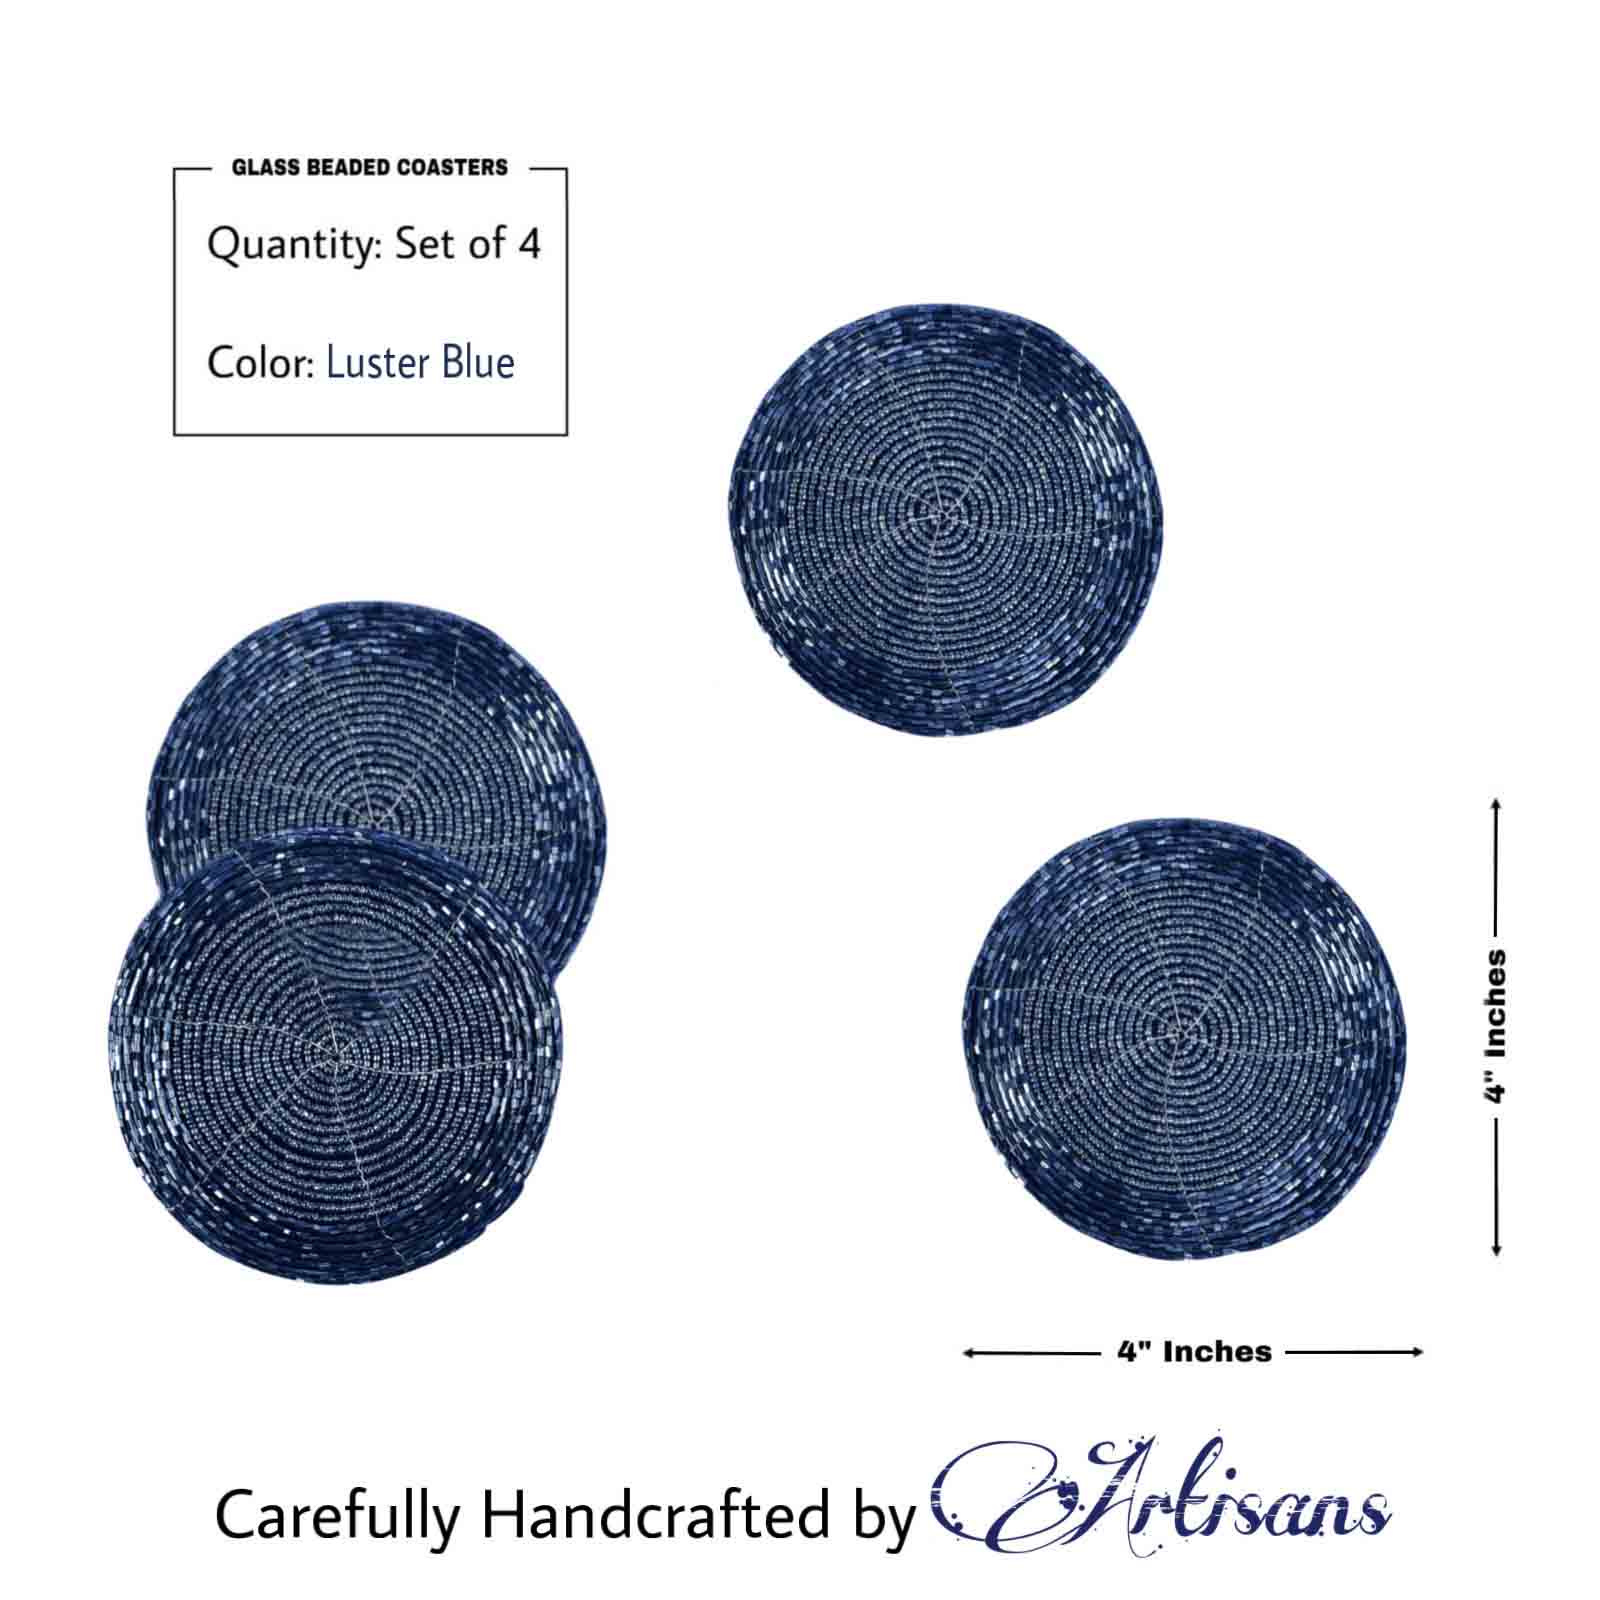 Glass Beaded Coaster in Luster Blue, Set of 4